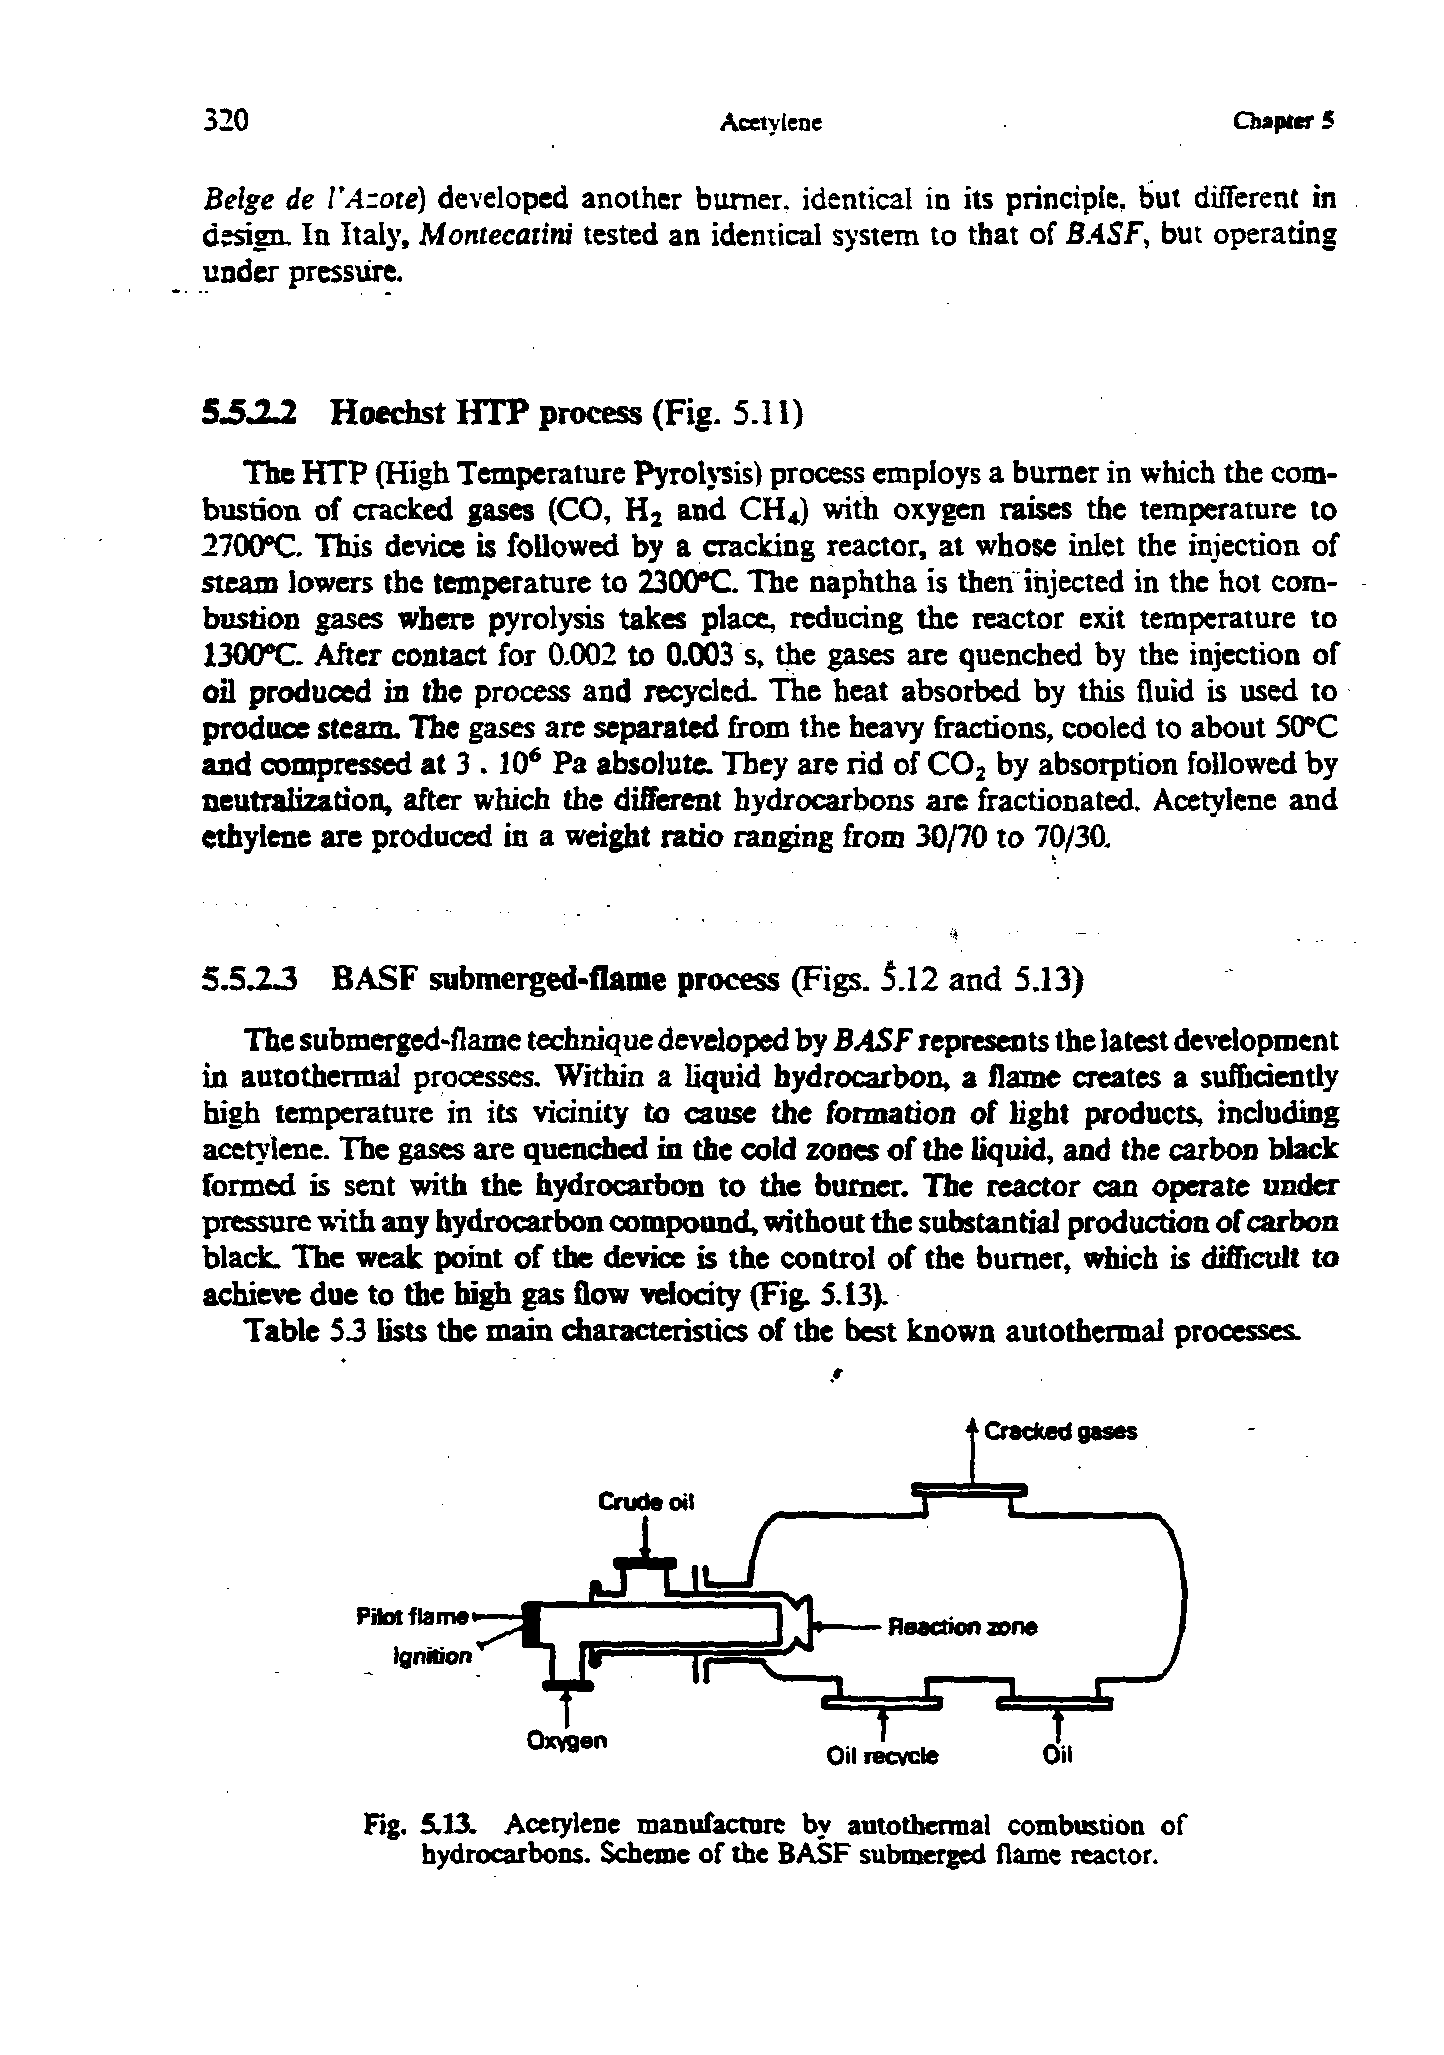 Fig. 5.13. Acetylene manufacture by autothennal combustion of hydrocarbons. Scheme of the submerg l flame reactor.